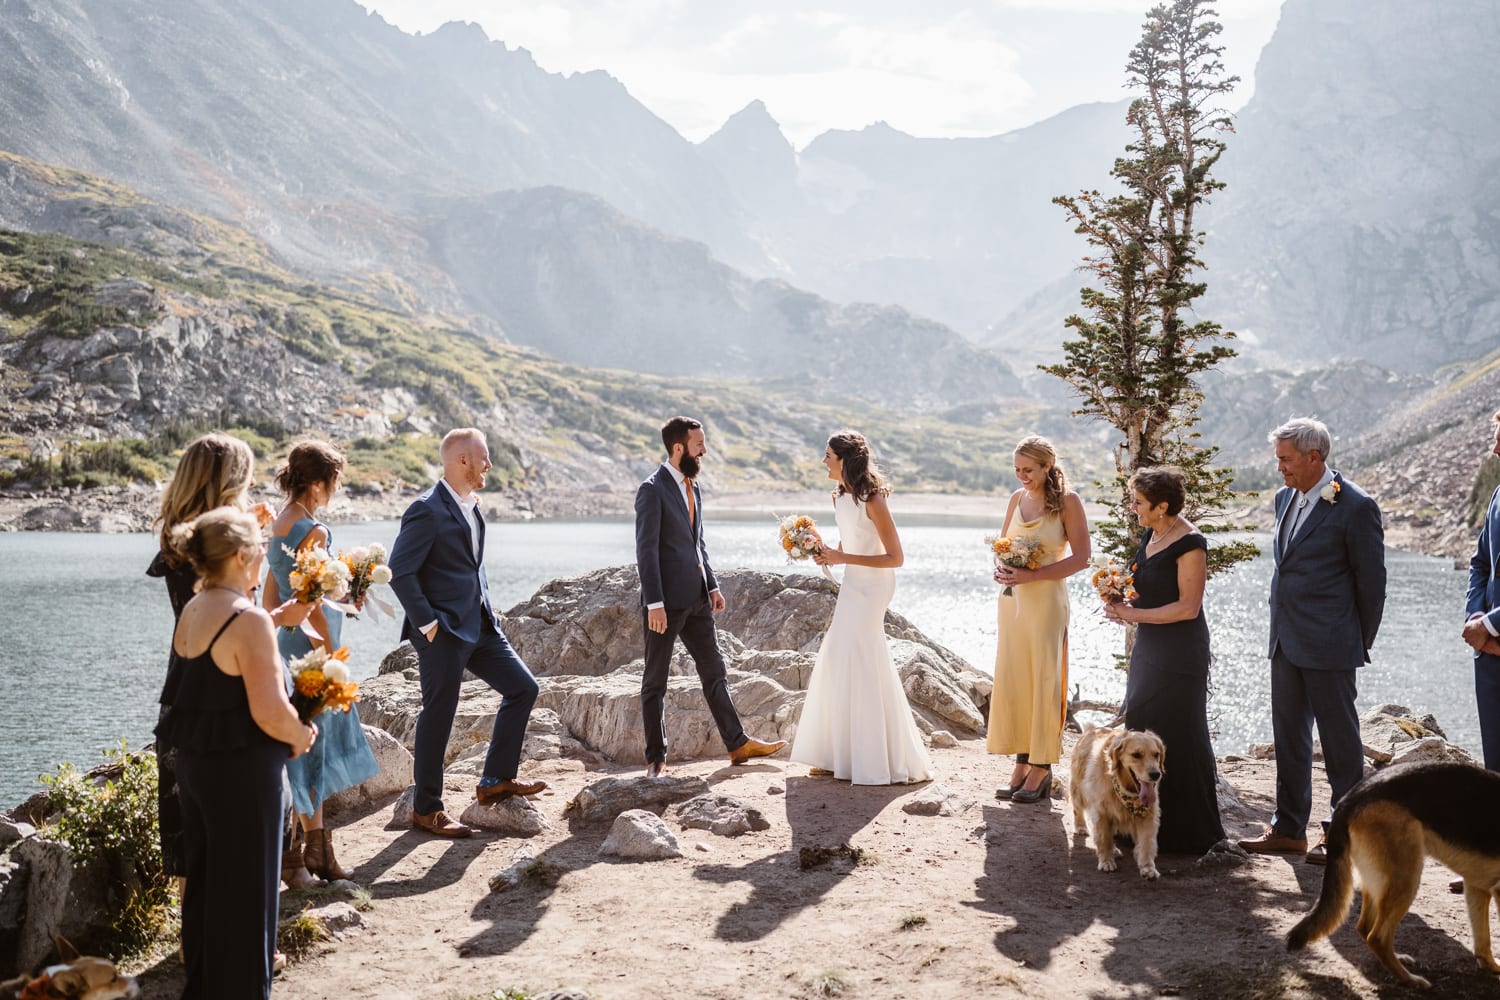 How To Plan An Unforgettable Post Elopement Party